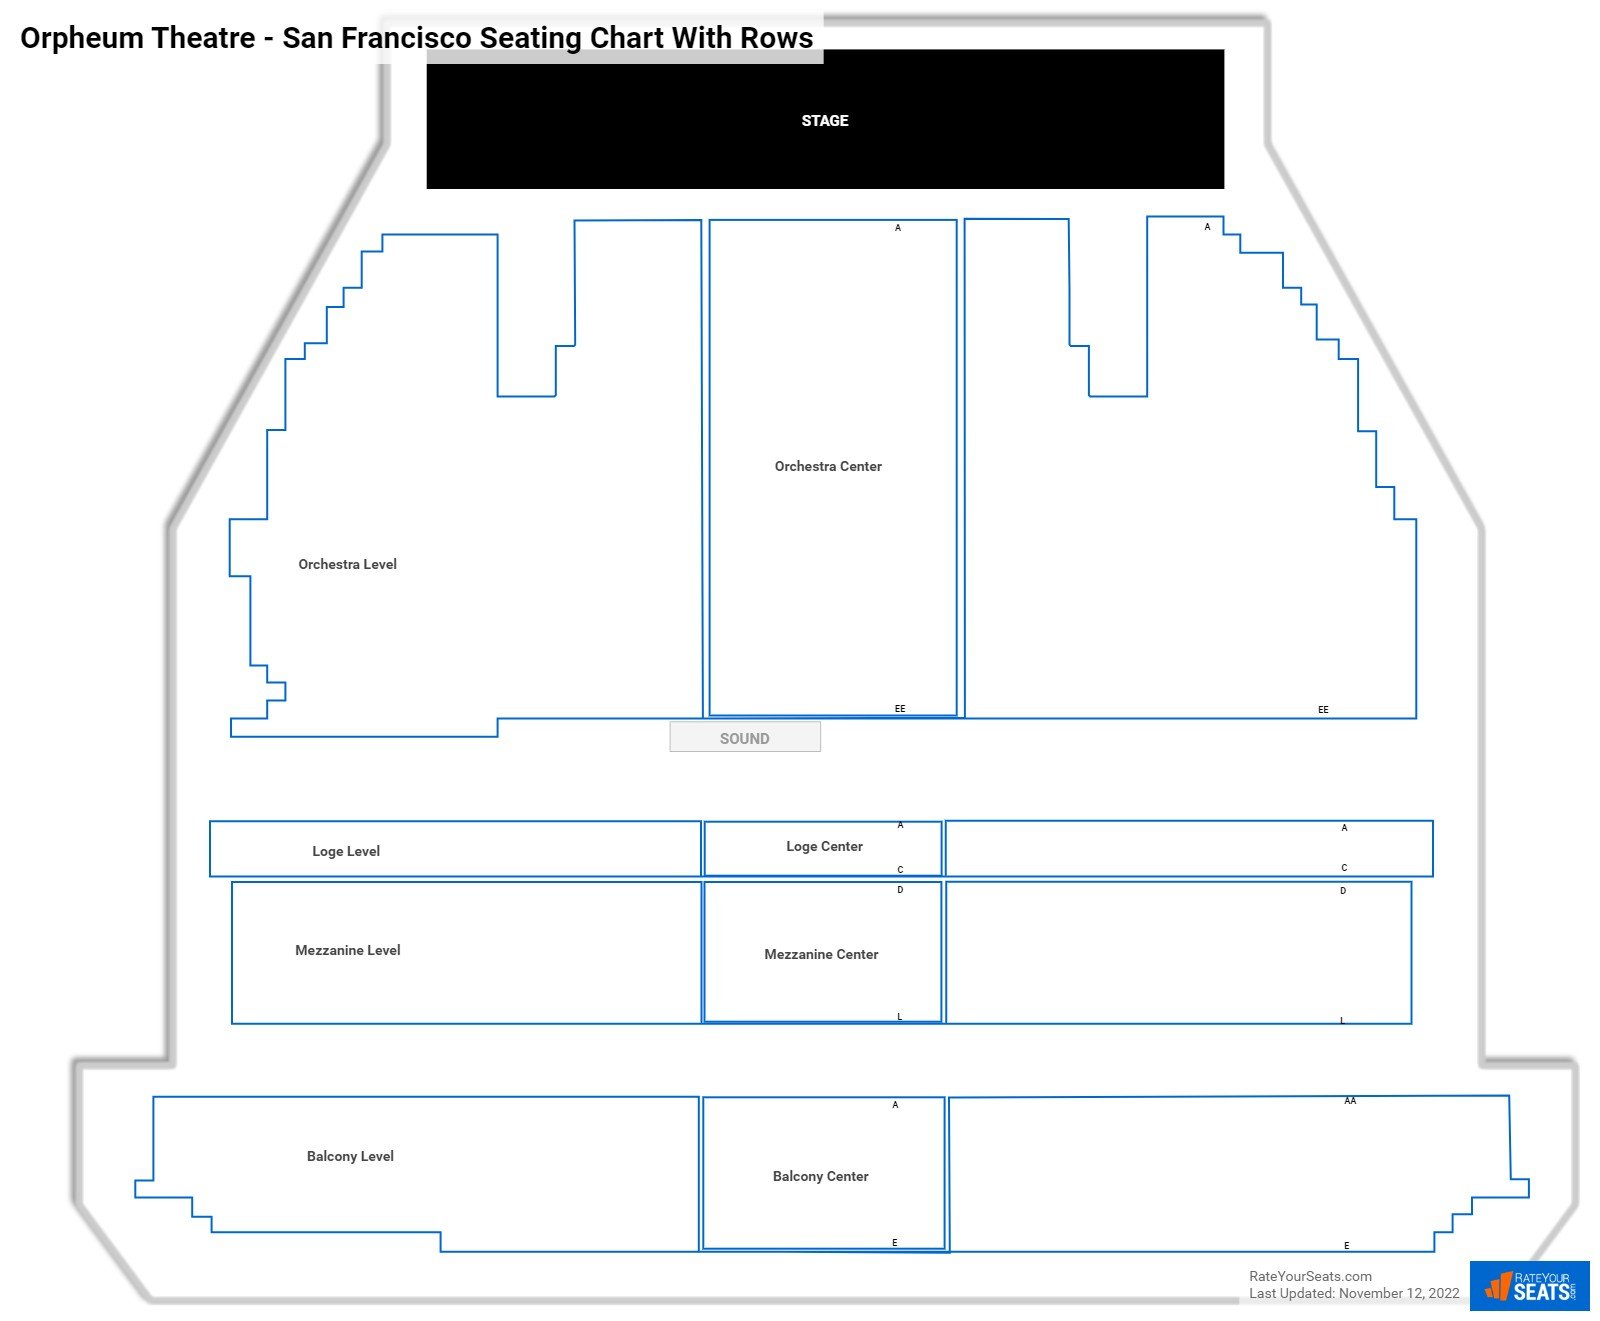 Orpheum Theatre - San Francisco seating chart with row numbers